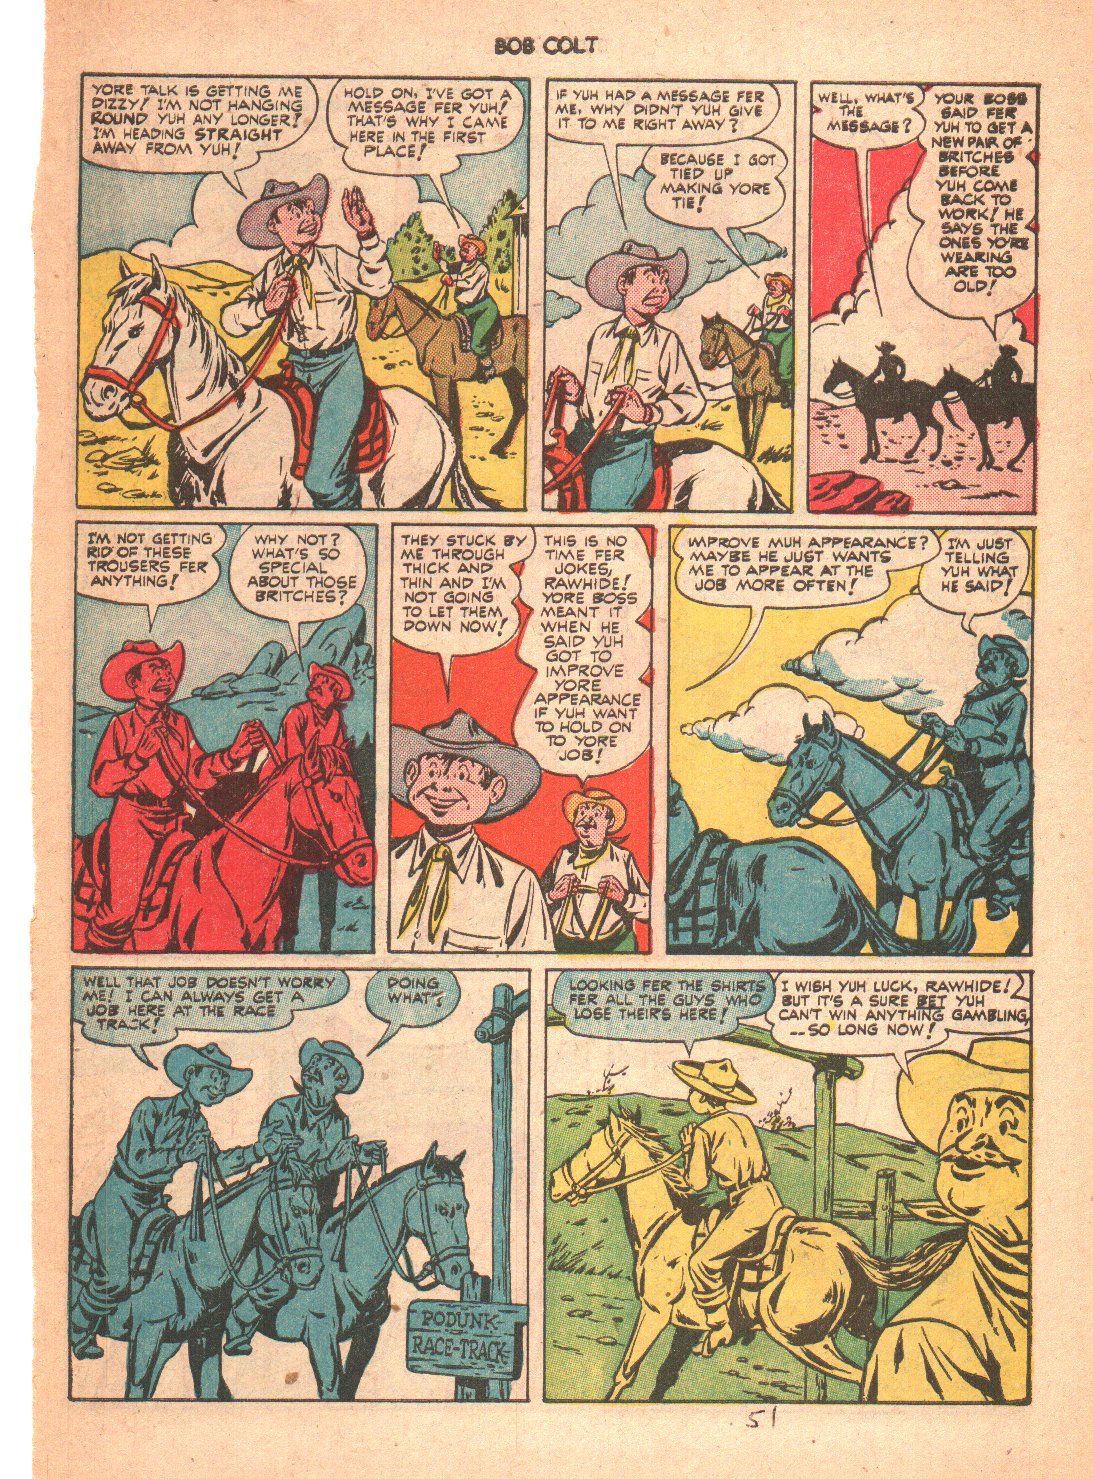 Read online Bob Colt Western comic -  Issue #6 - 18